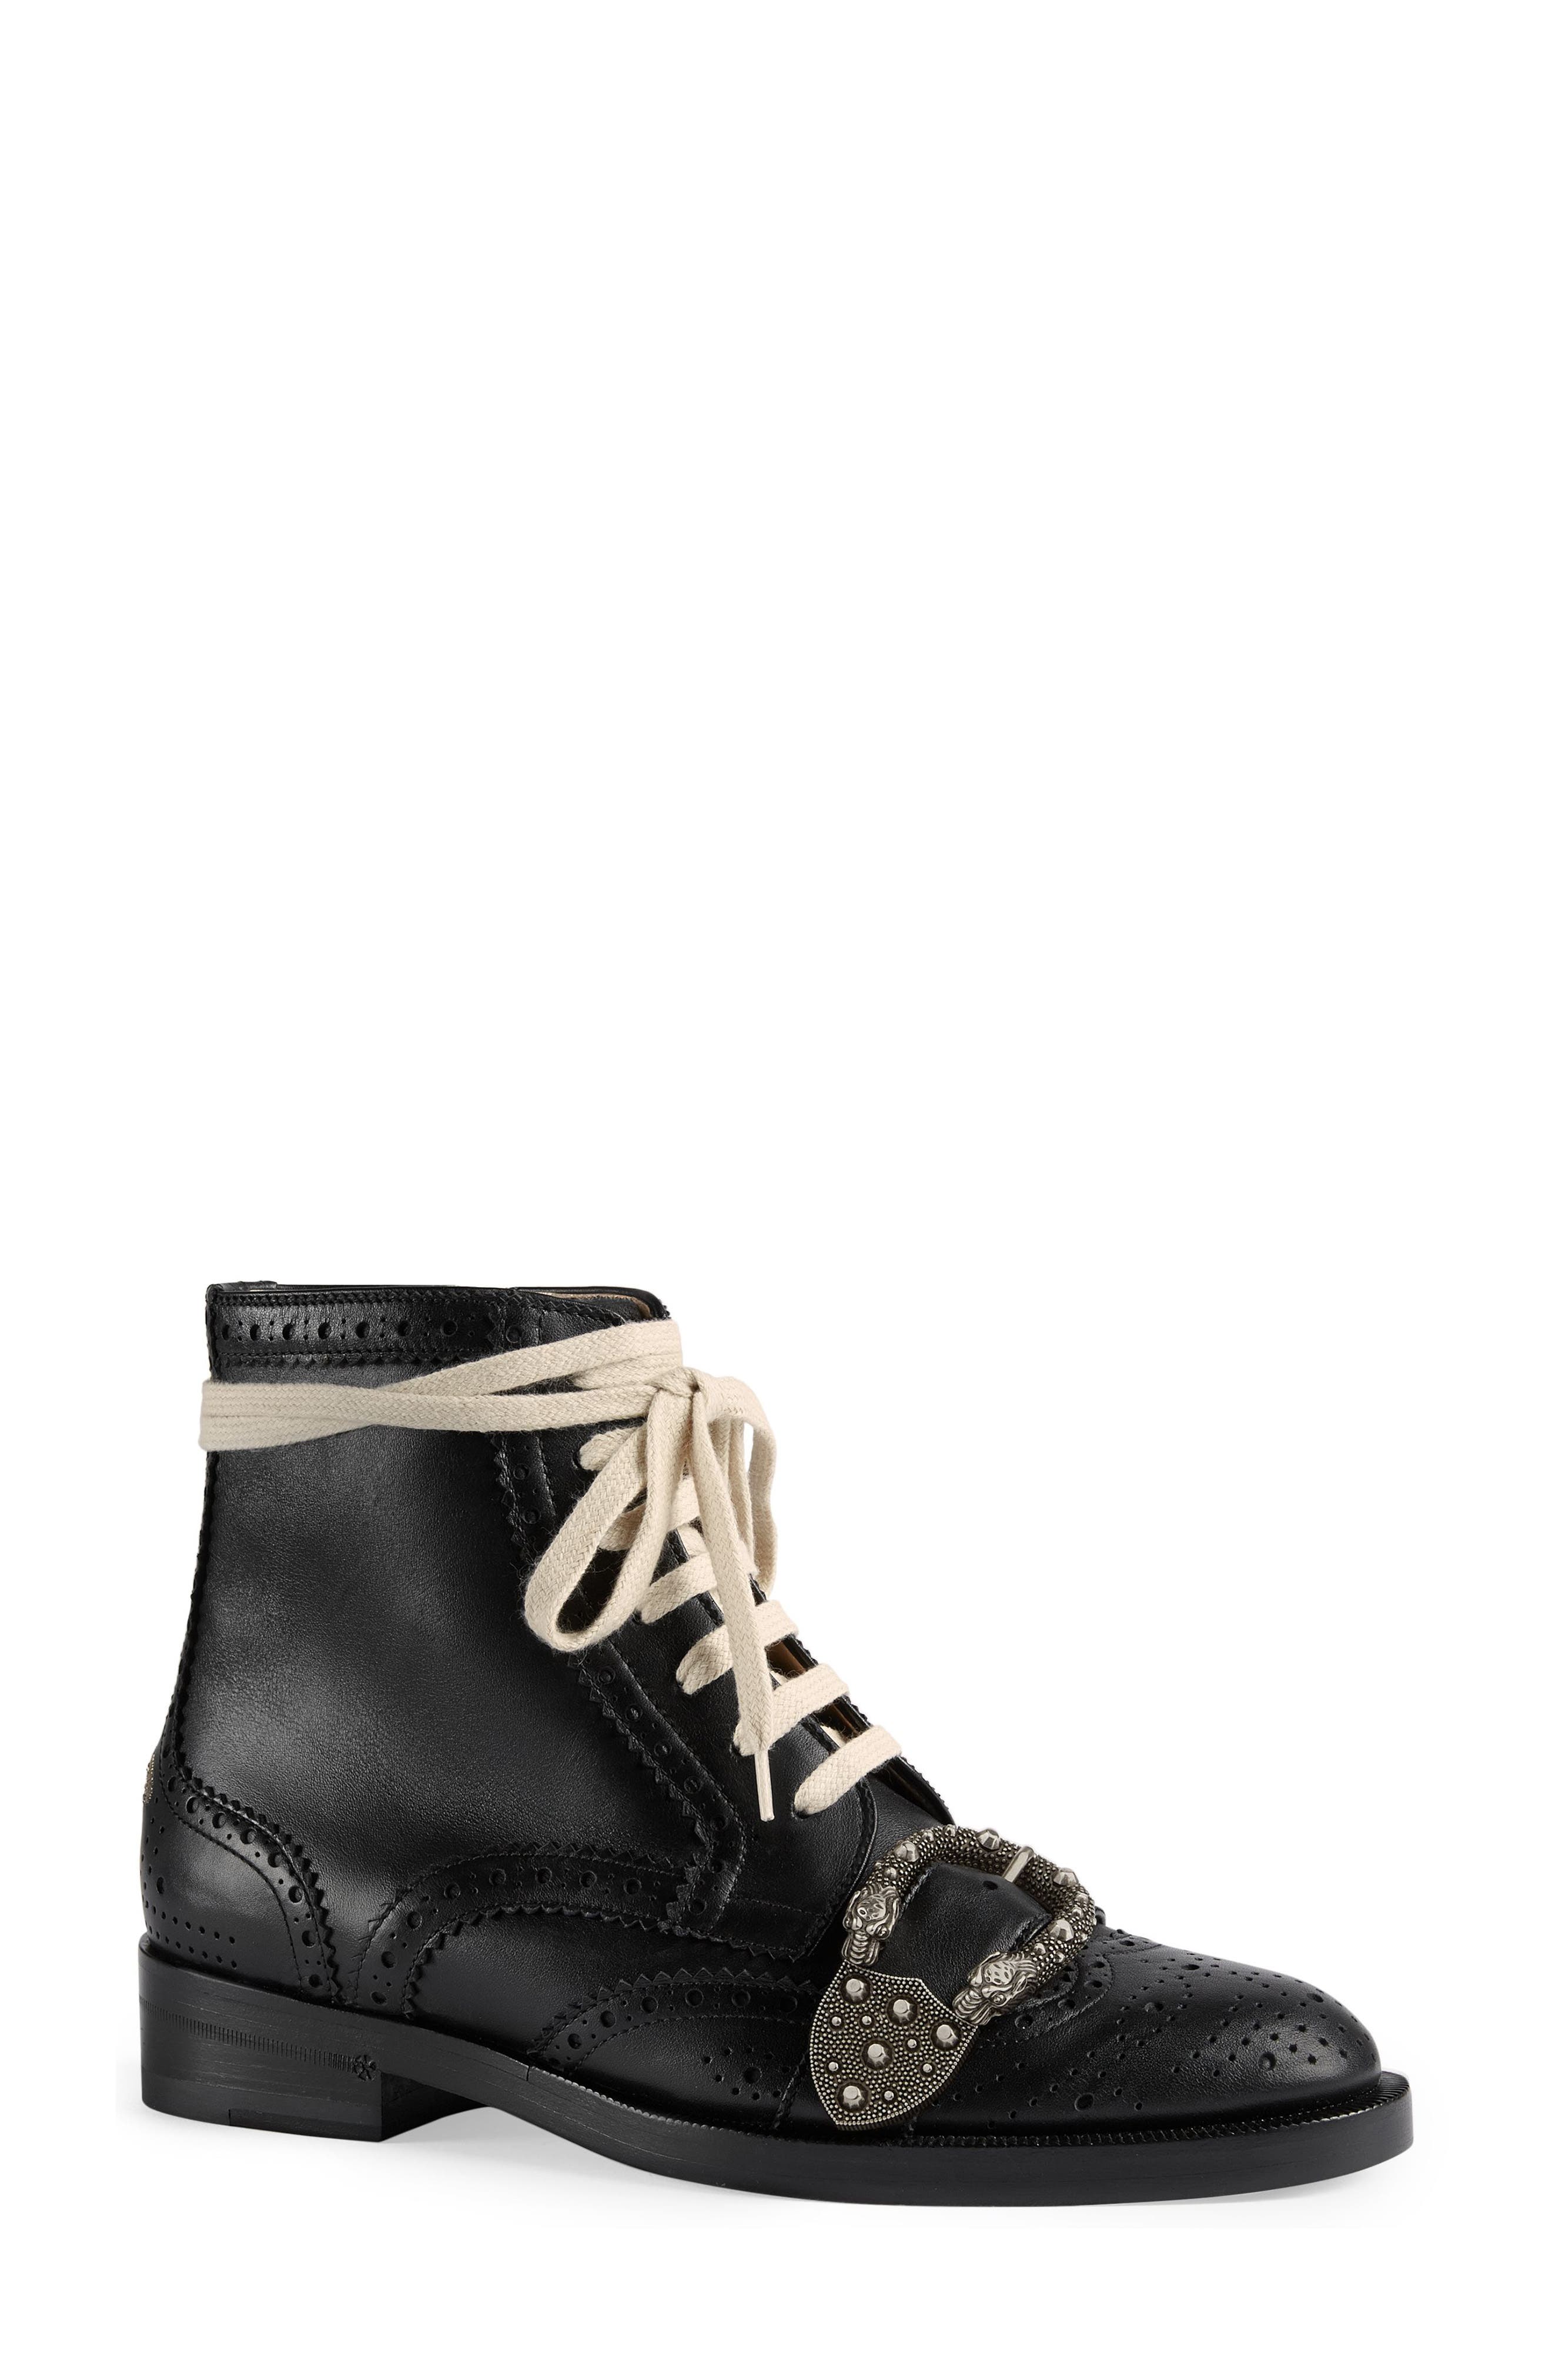 queercore boots